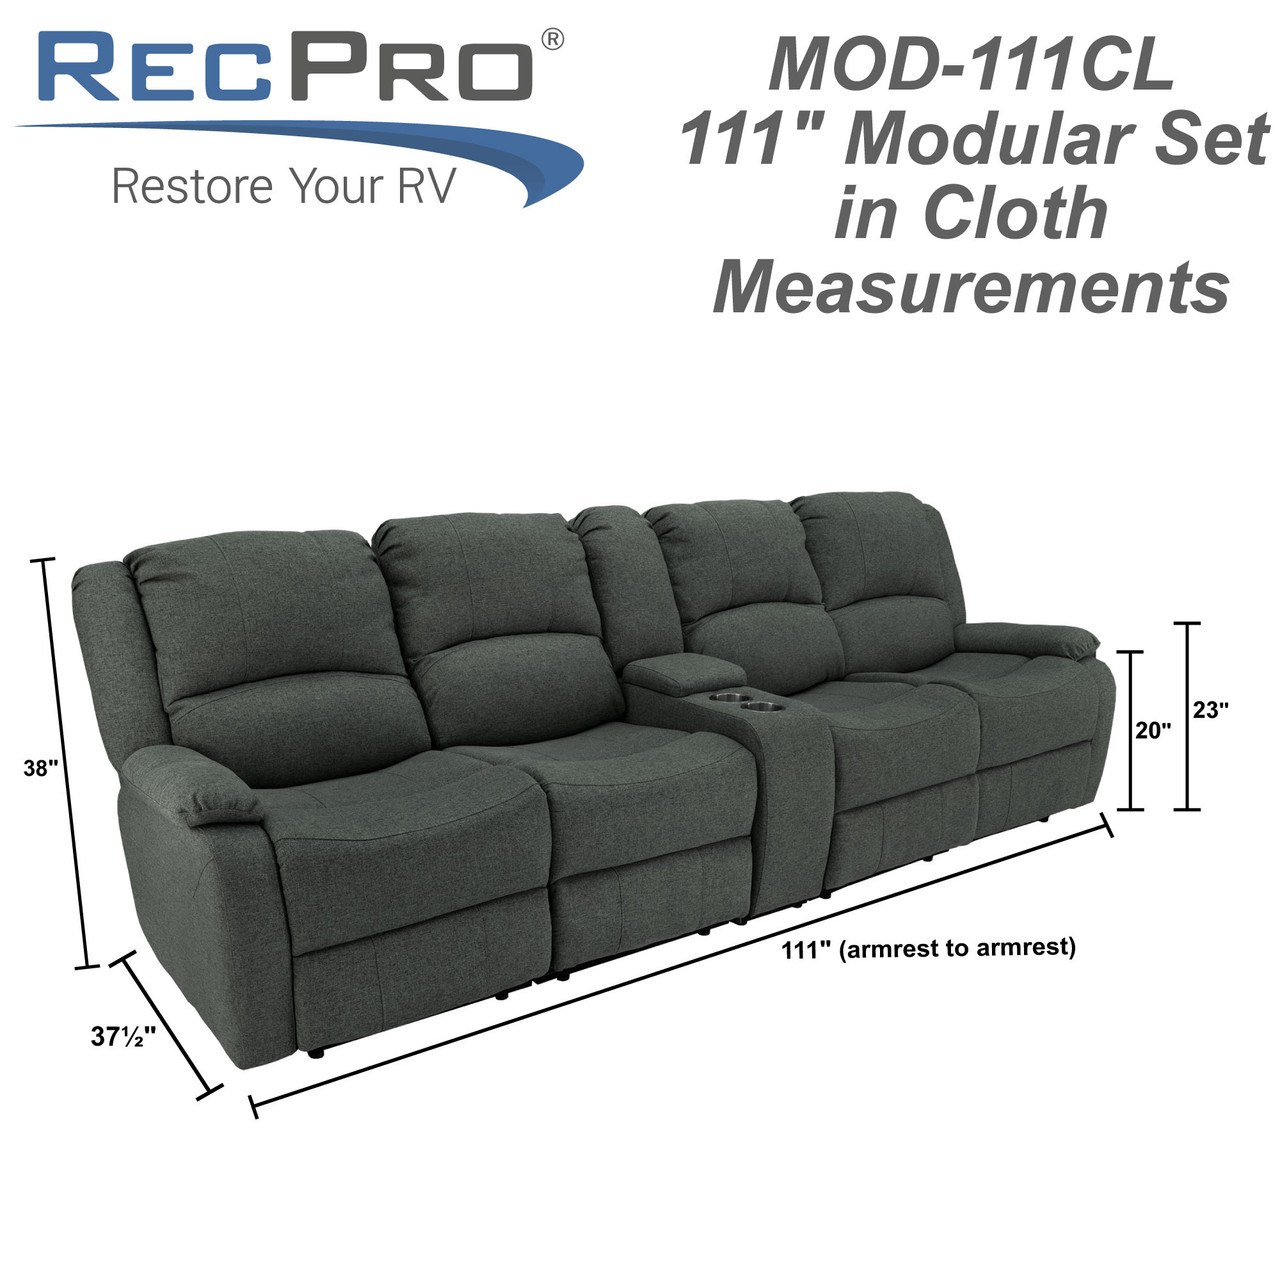 Charles Down in with Quad Cloth Holder Cup Consoles Sofa Wall Hugger - RecPro RecPro Two Recliner RV & Drop 111\